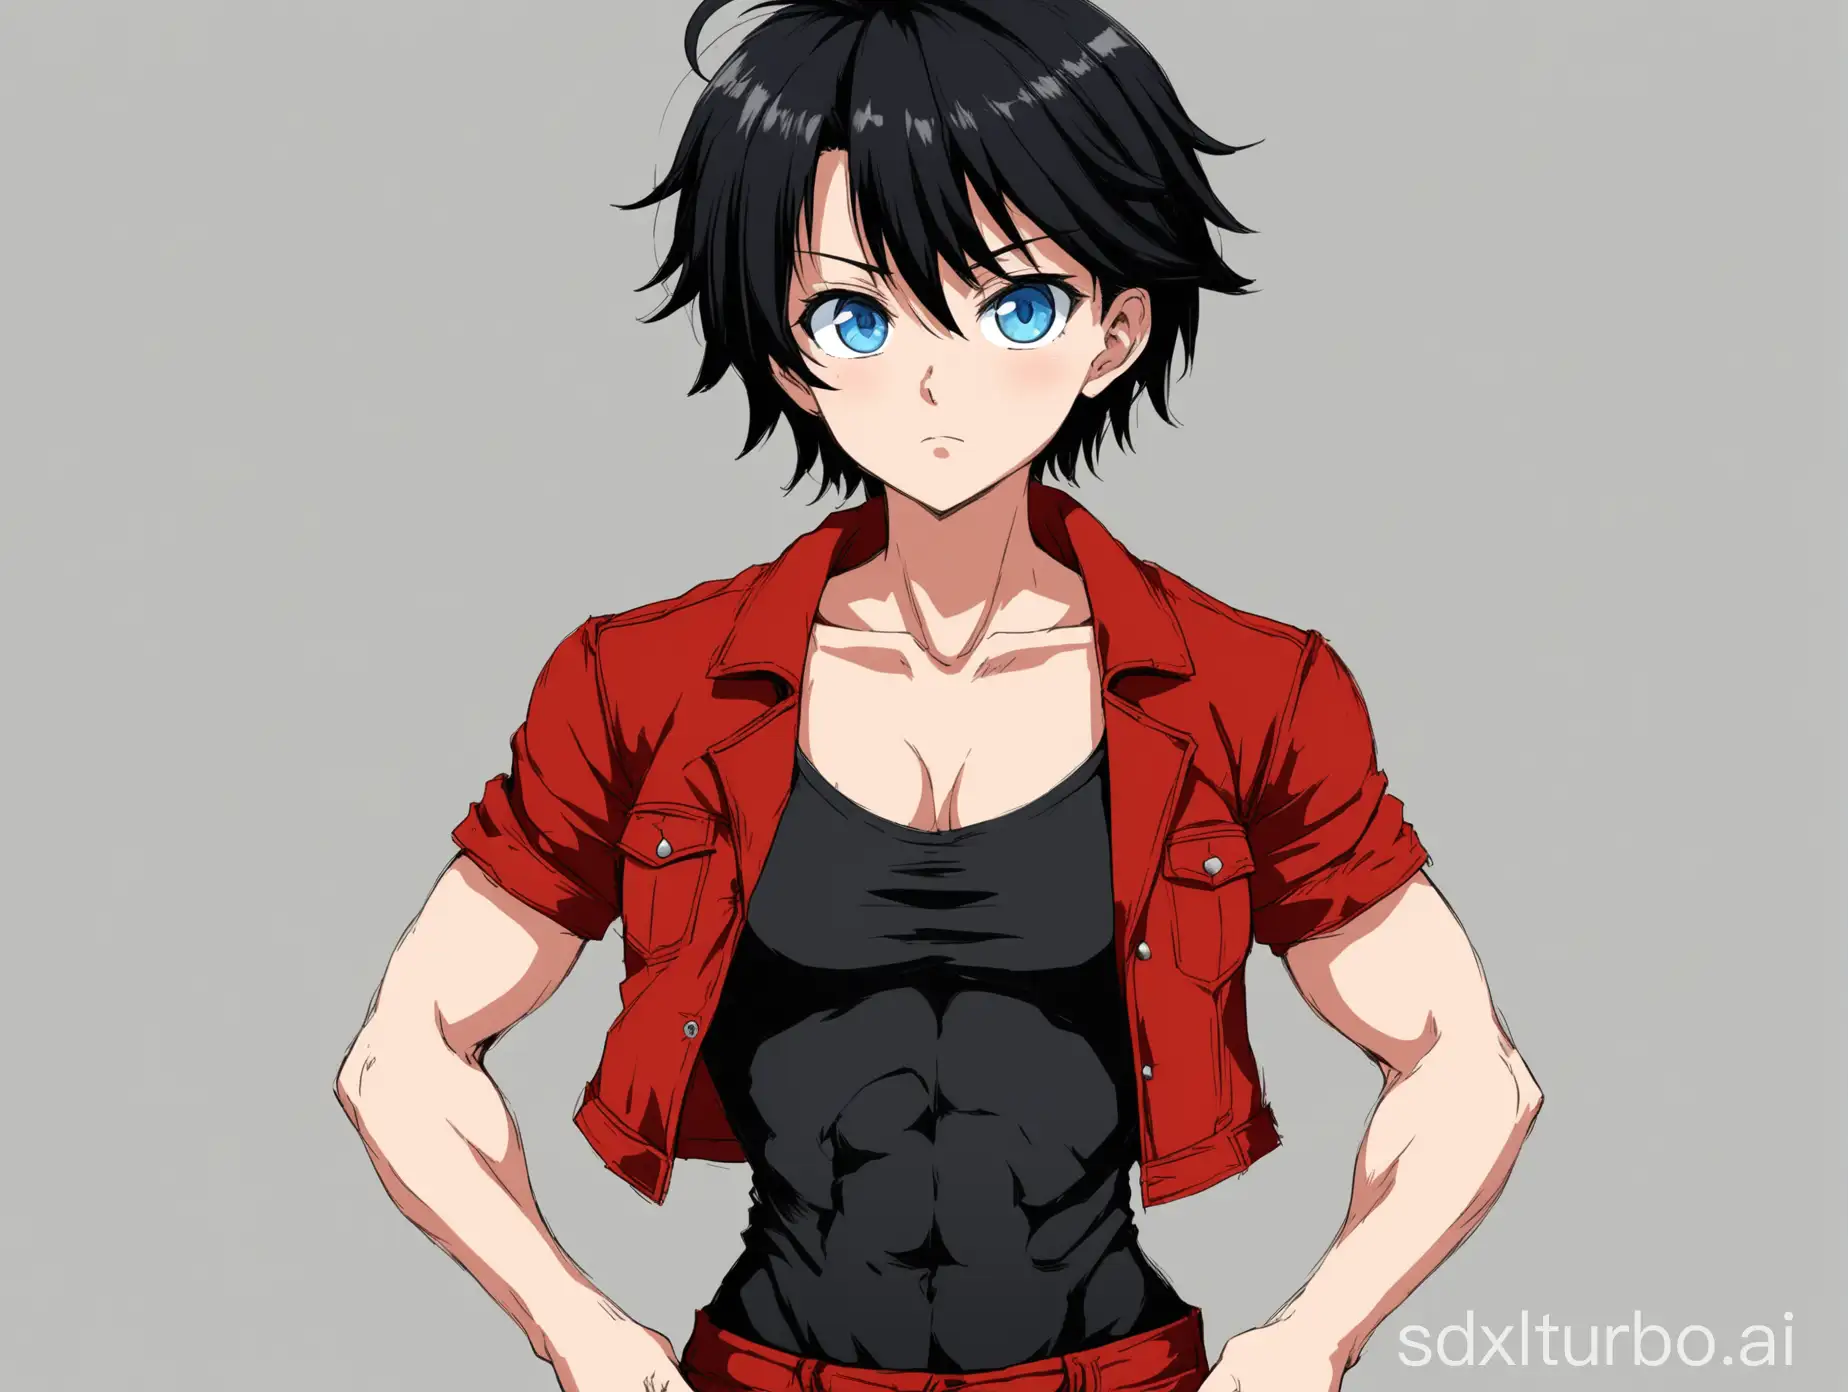 best quality, illustration, 1 girl, only girl, black t-shirt that shows the torso with neckline, blue eyes, short black hair, ahoge, red jeans, good anatomy, best anatomy, red dress jacket, good hands, in anime style, tomboy, a little muscle, white background, anime body